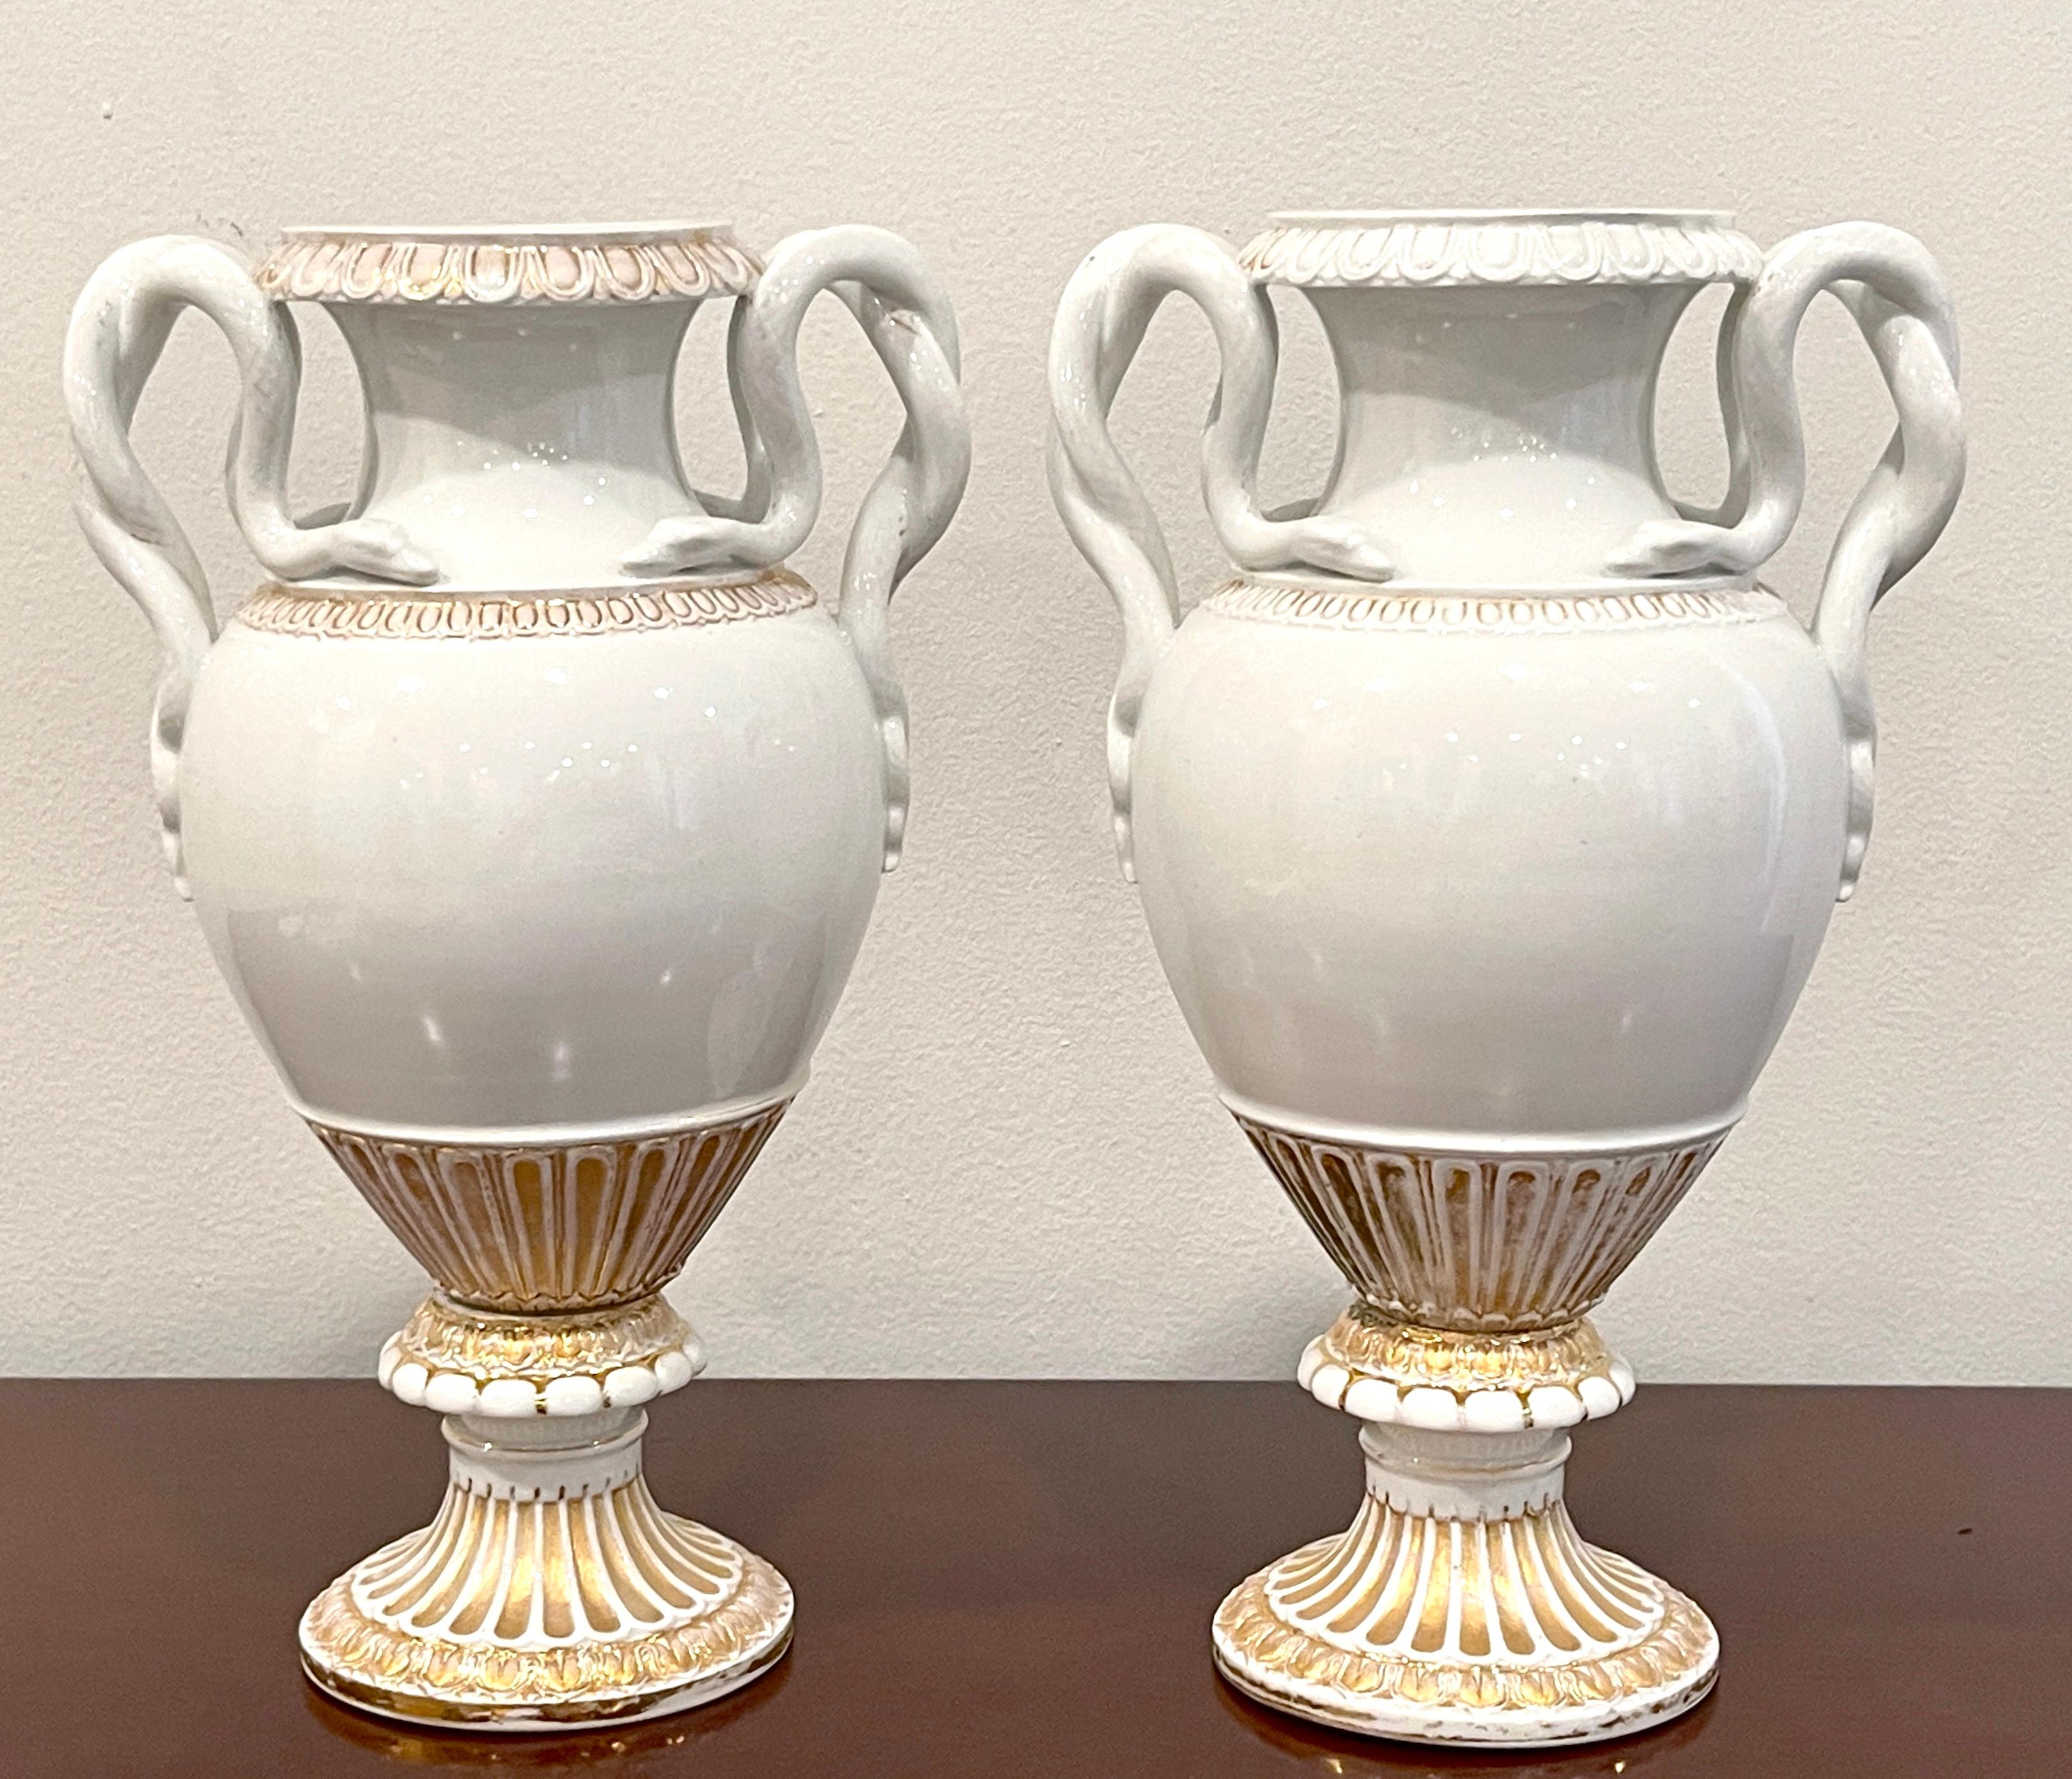 Pair of 19th Century Meissen gold & white neoclassical serpent handled vases.
Germany, circa 1880s
Design attributed to E.A. Leuteritz 

Hard to find a pair of understated Meissen neoclassical urns, each one with intertwined serpent handles,